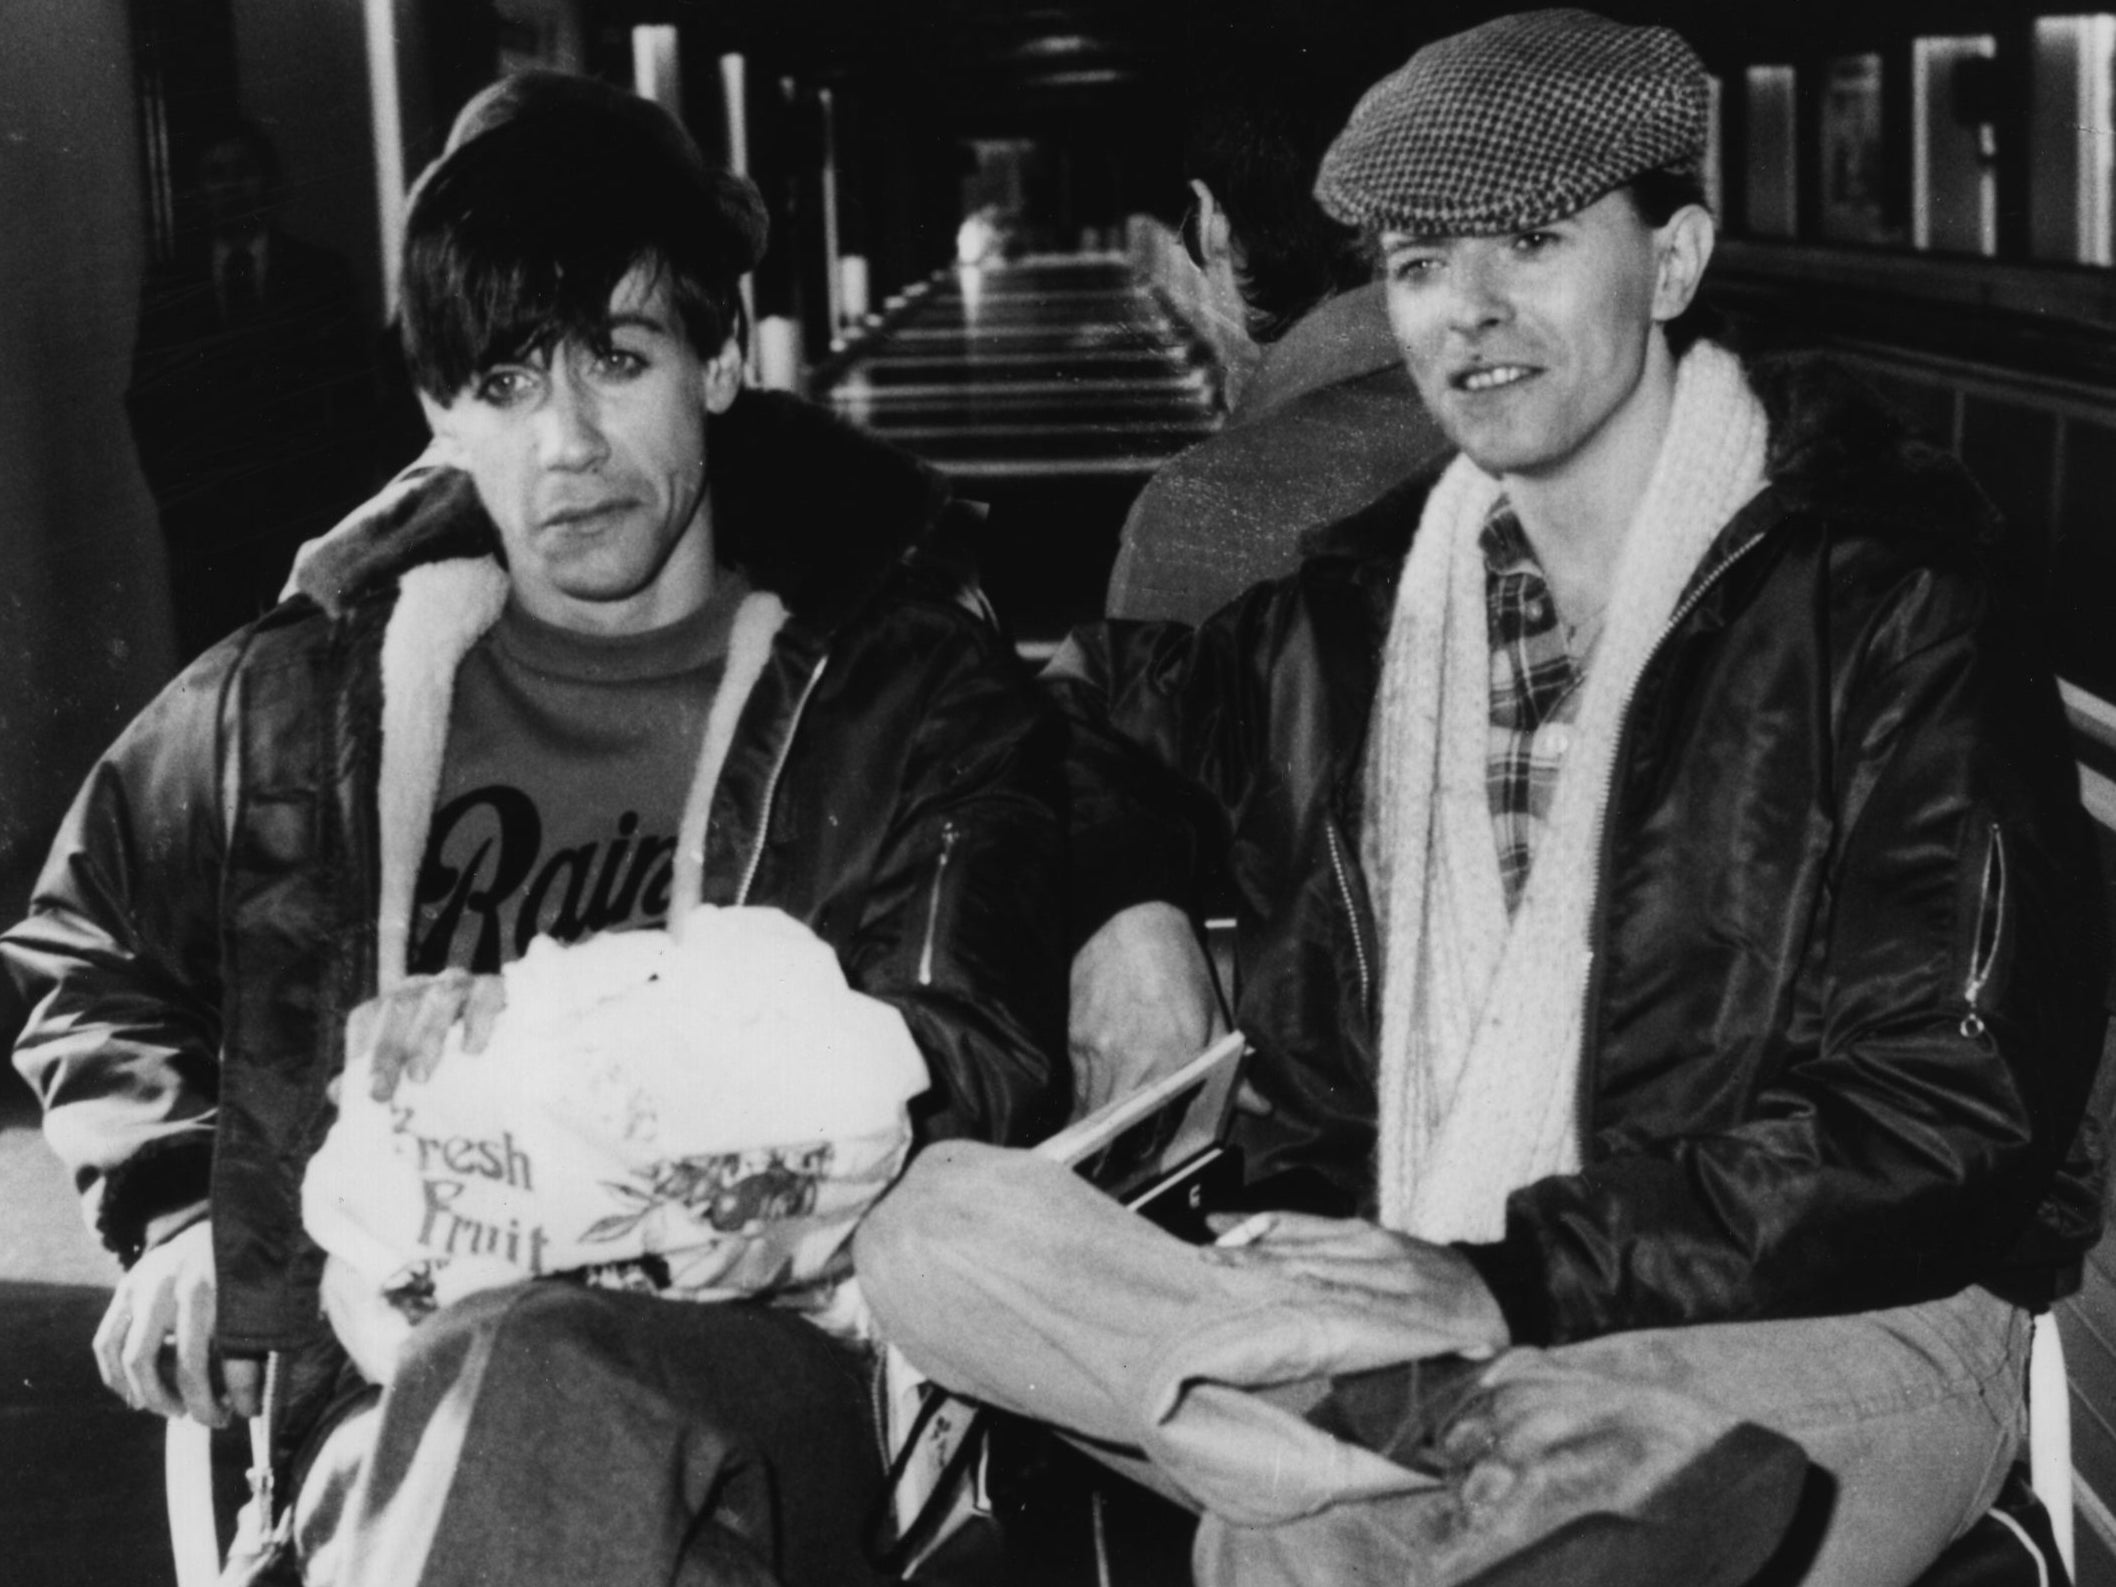 Here comes success? Iggy Pop and David Bowie in Germany, 1977